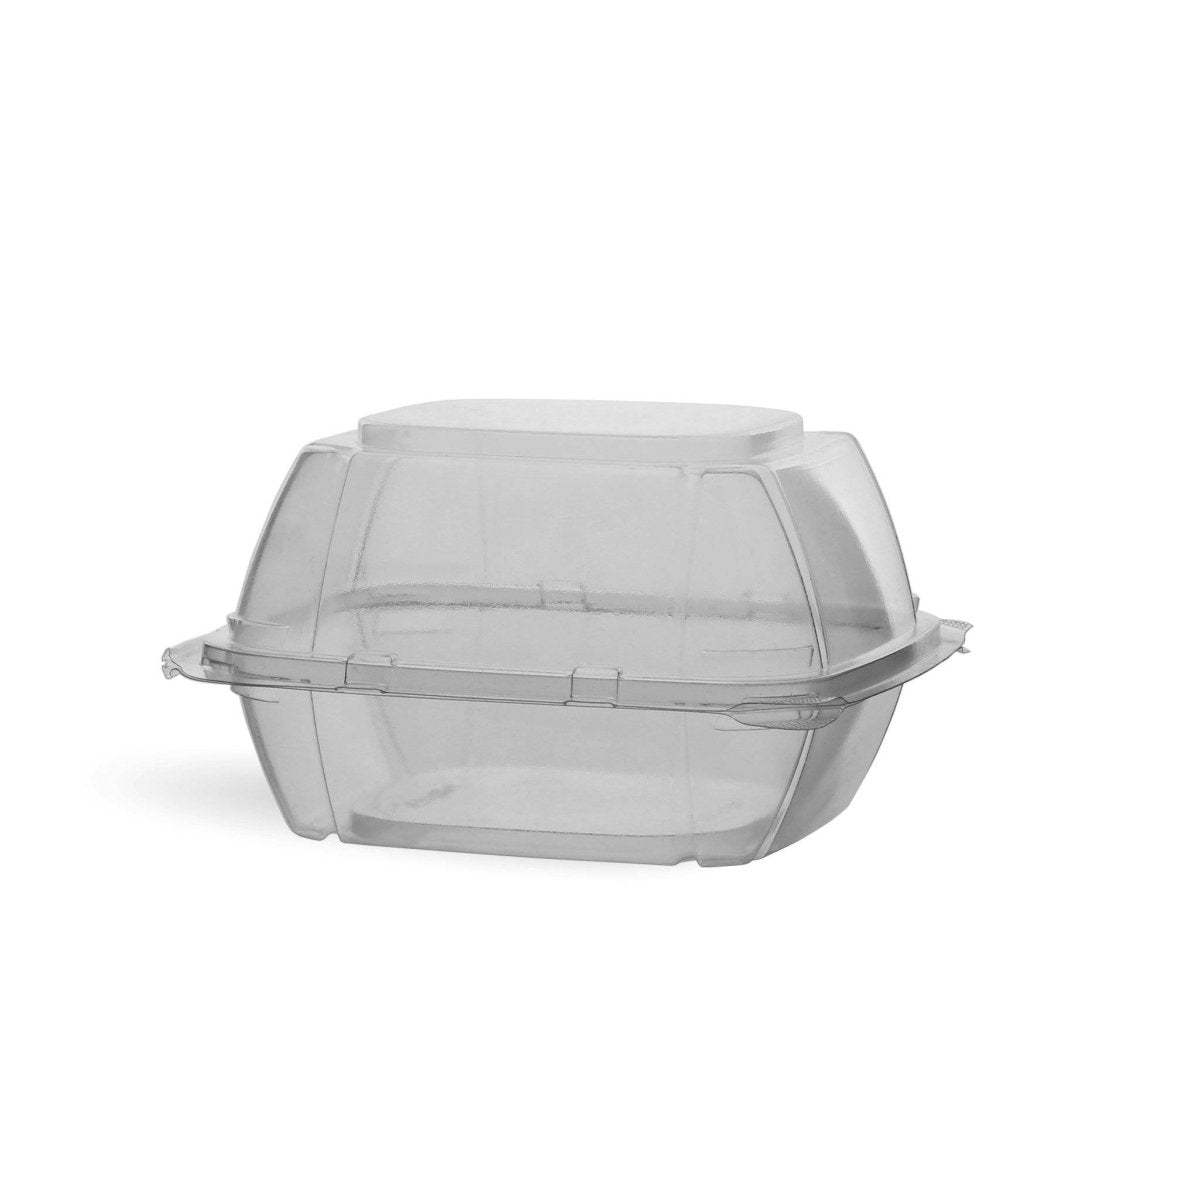 6 Clear Hinged Burger Box 50 Pieces x 10 Packets - hotpackwebstore.com - Burger Boxes